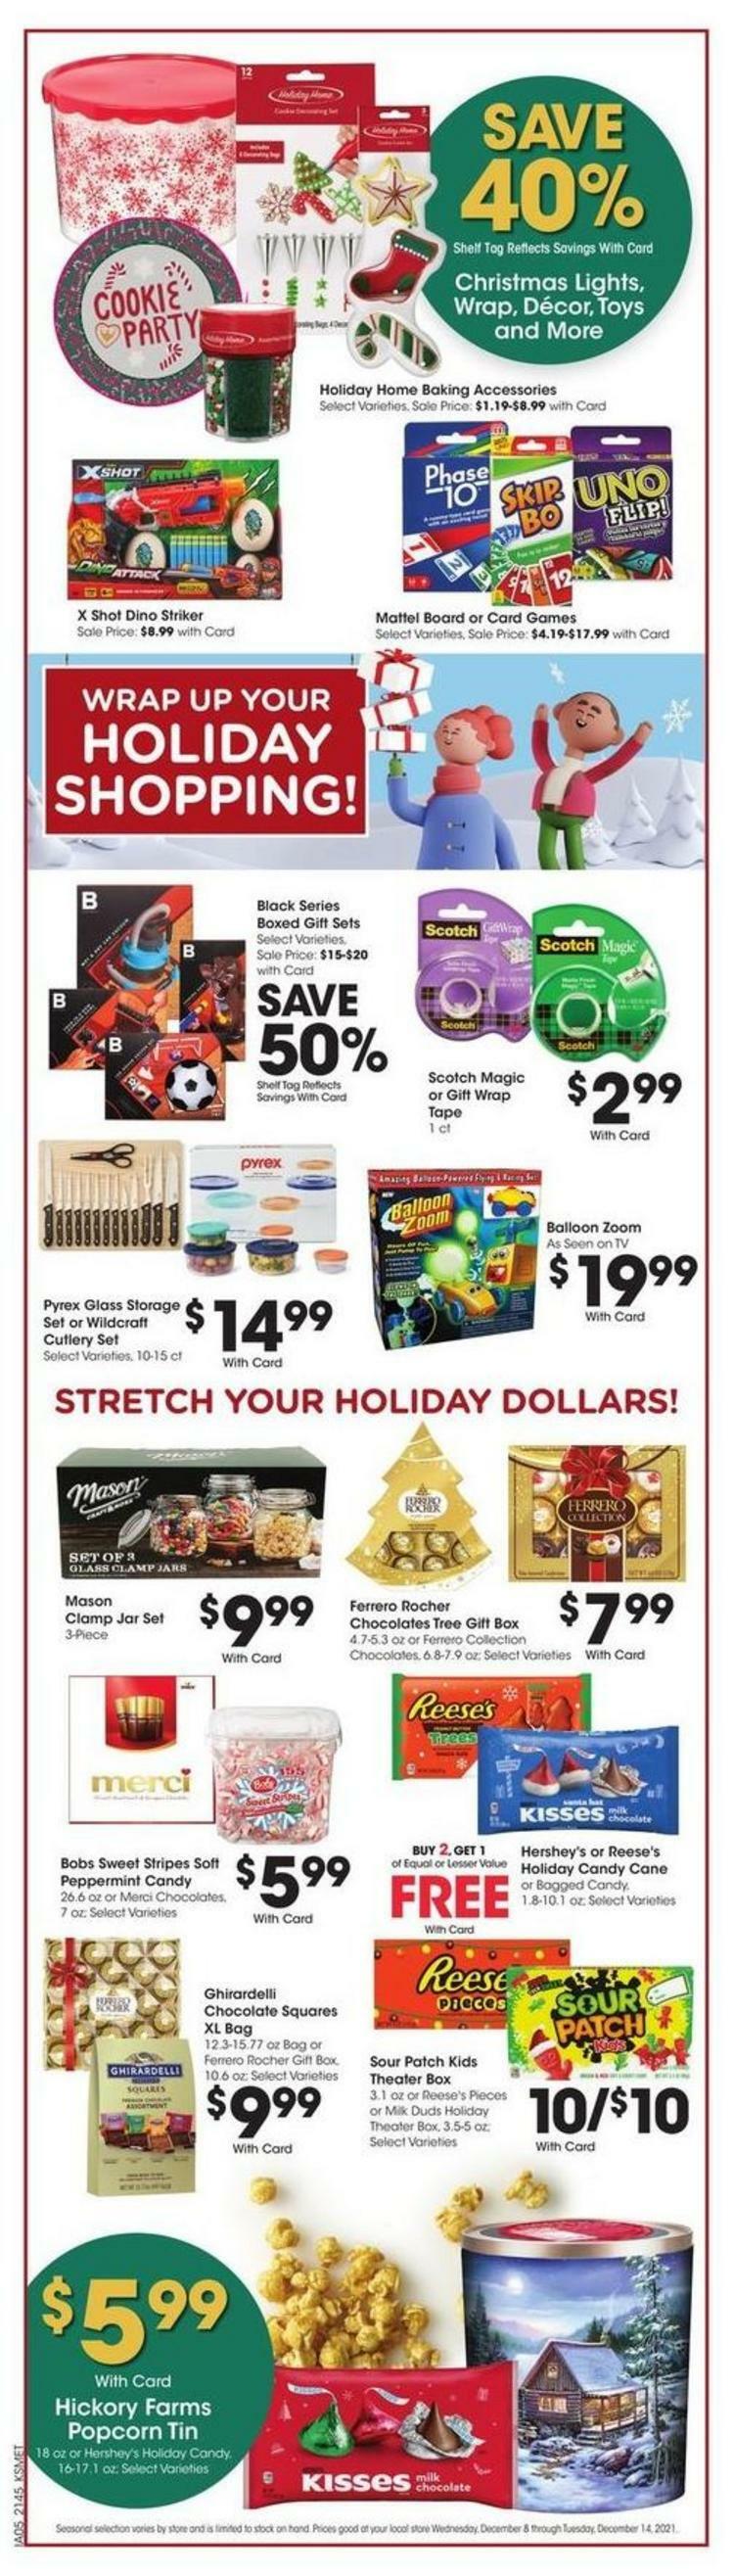 City Market Weekly Ad from December 8